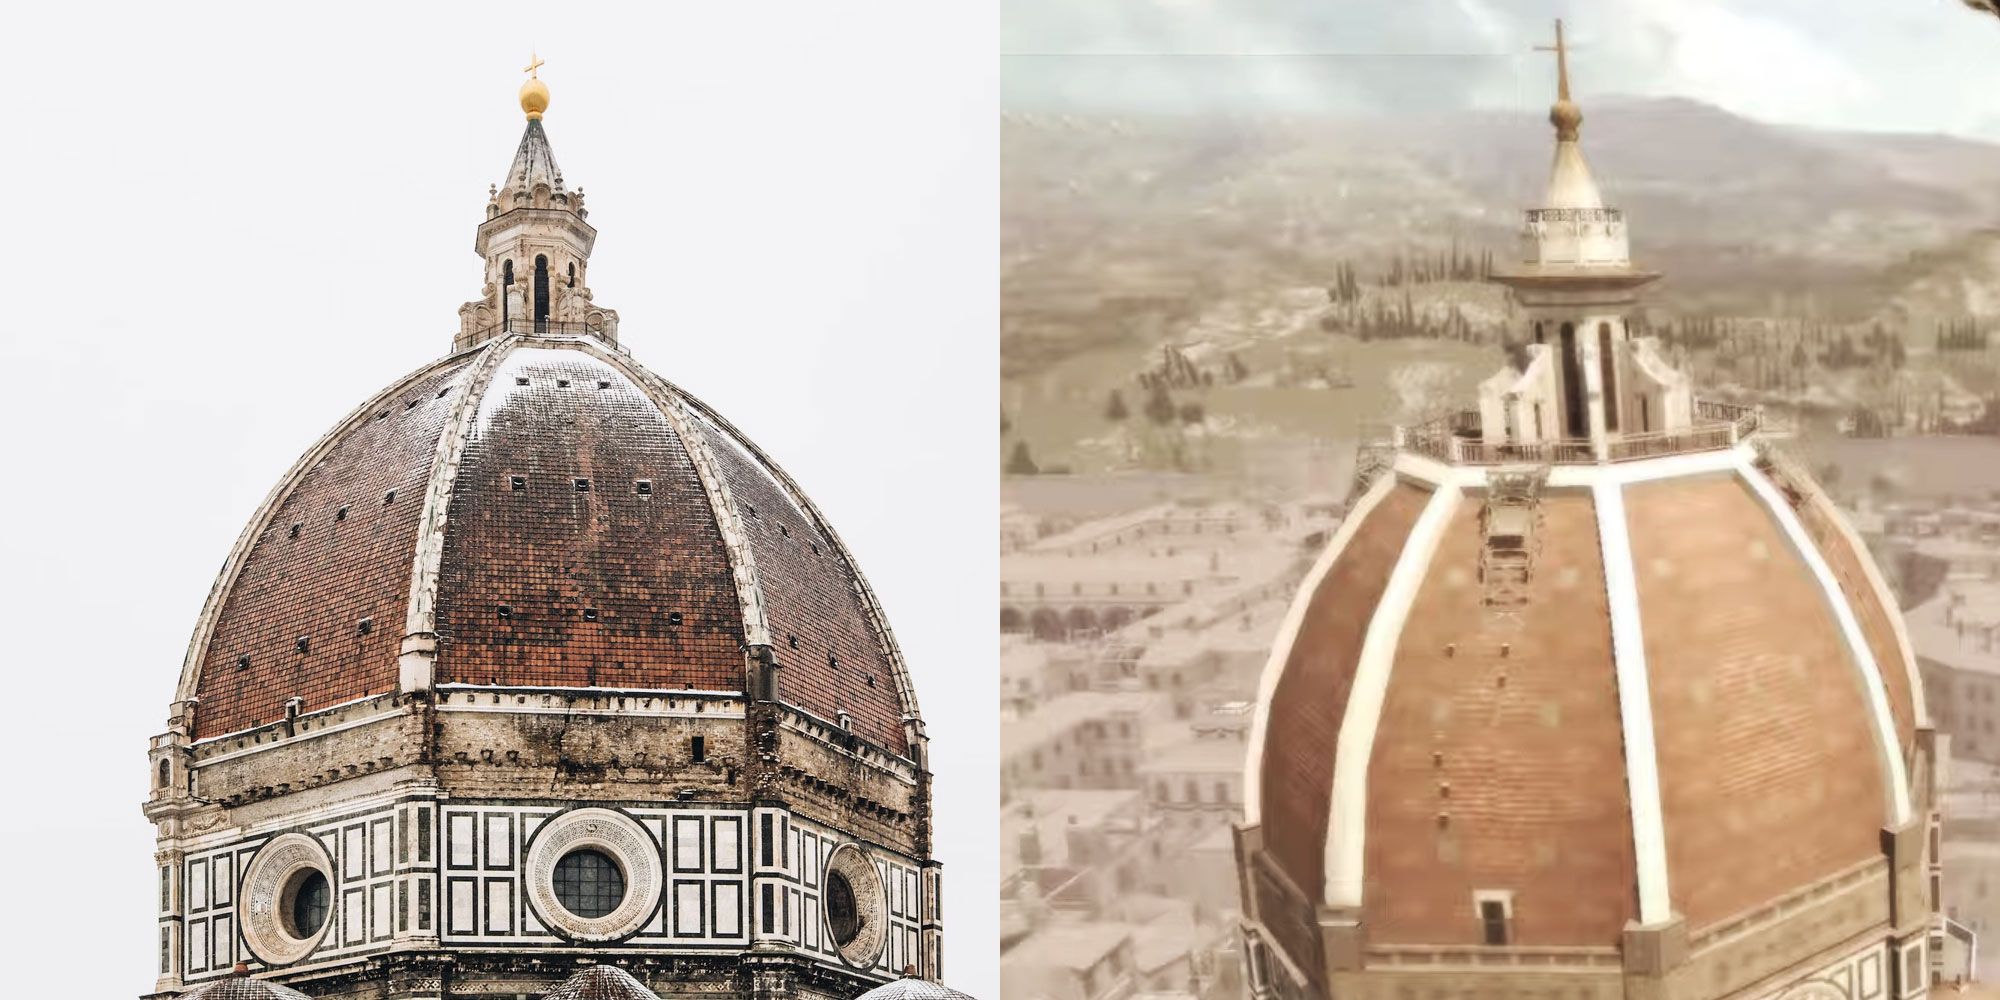 Cathedral Of Santa Maria Del Fiore in Assassin's Creed vs Real Life.